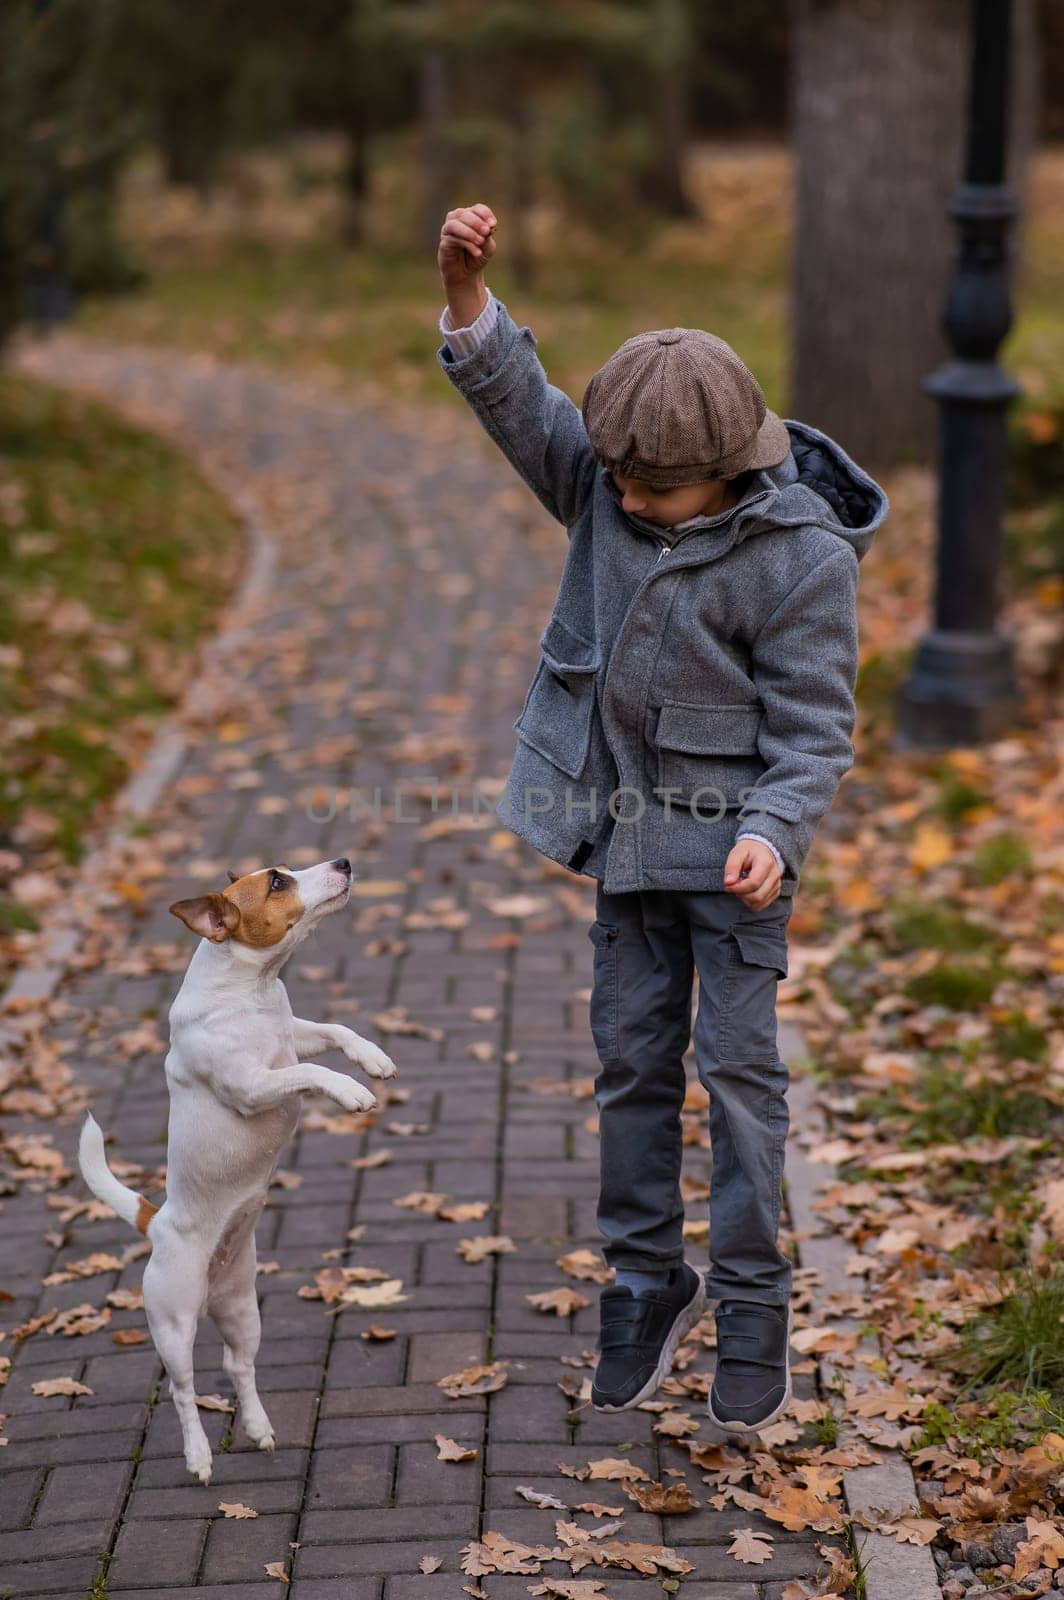 Caucasian boy playing with a dog for a walk in the autumn park